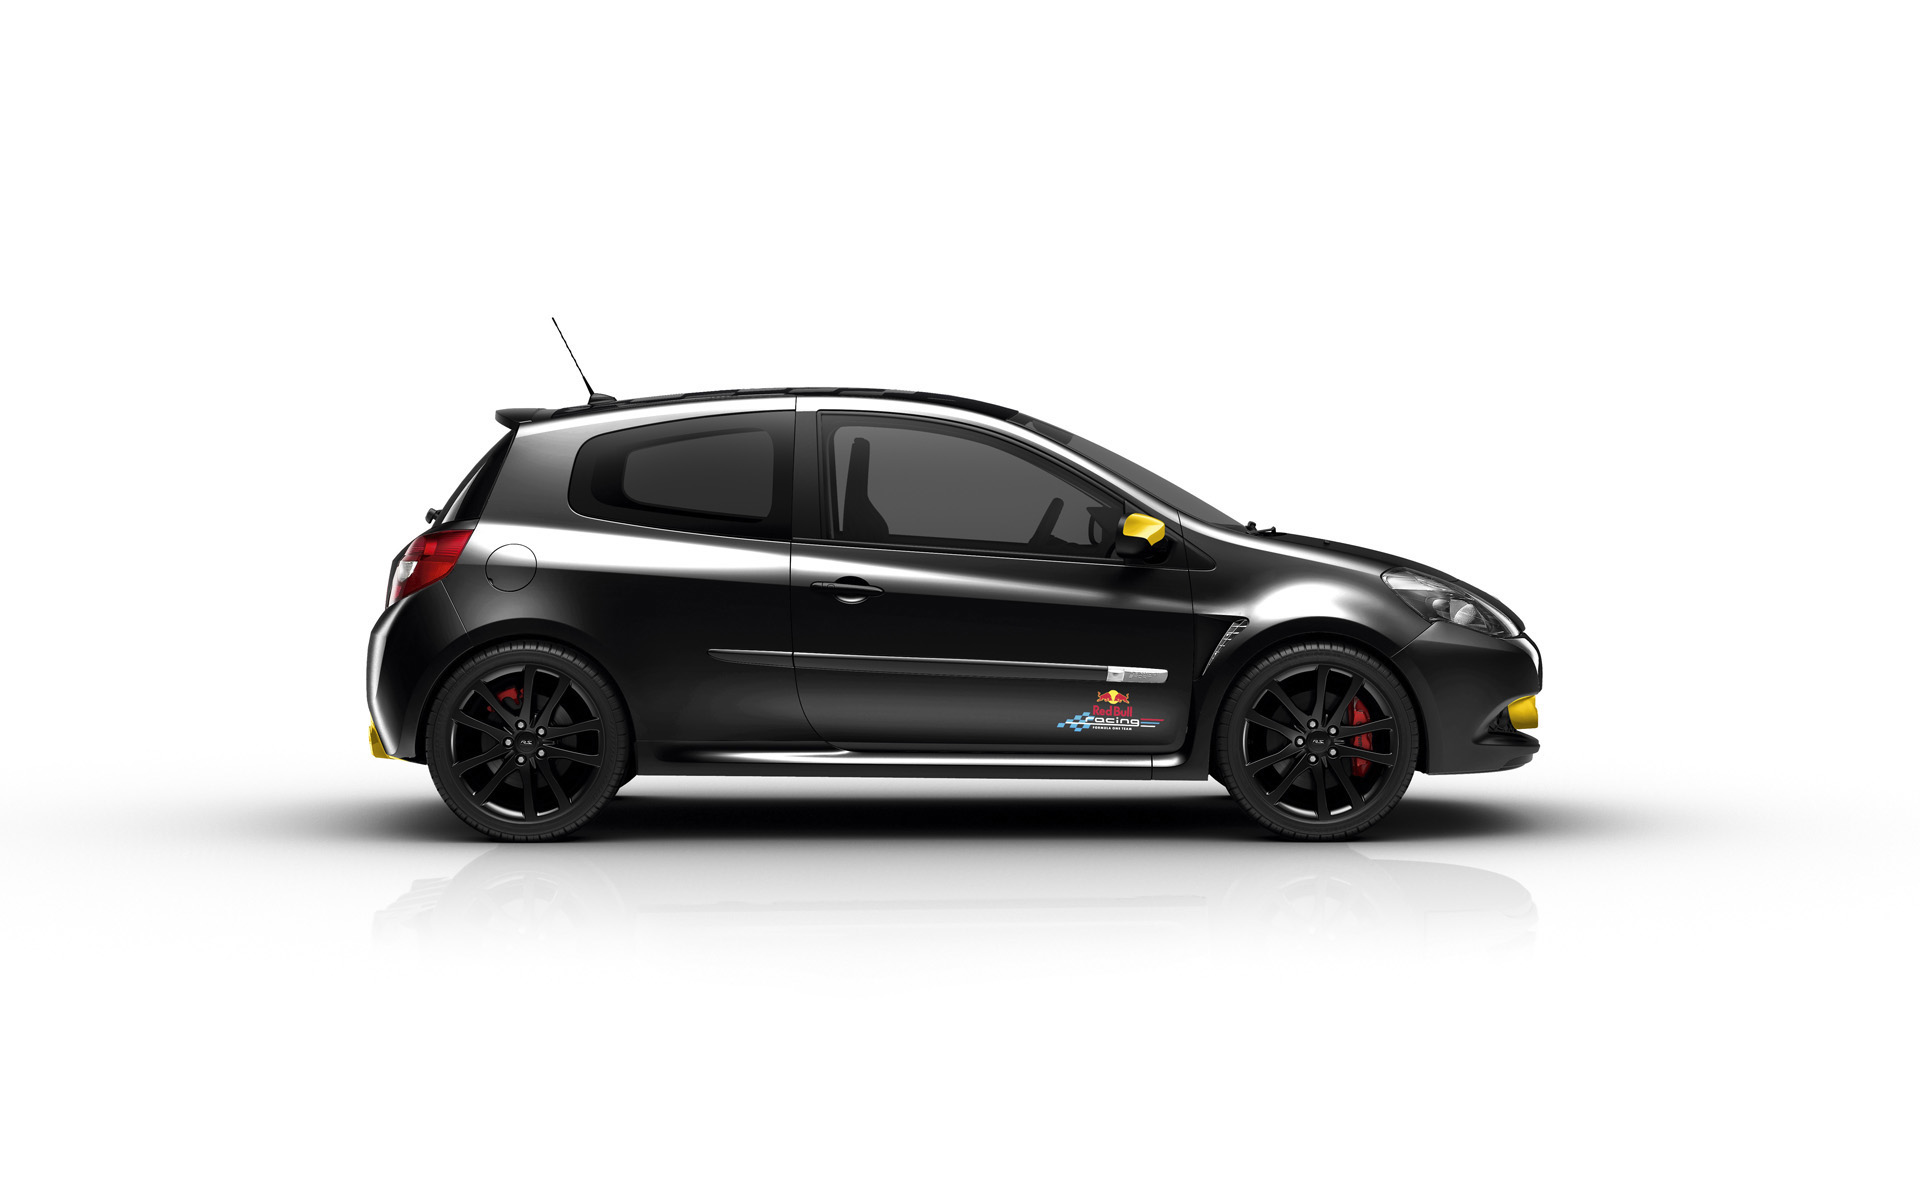  2012 Renault Clio RS Red Bull Racing RB7 Wallpaper.